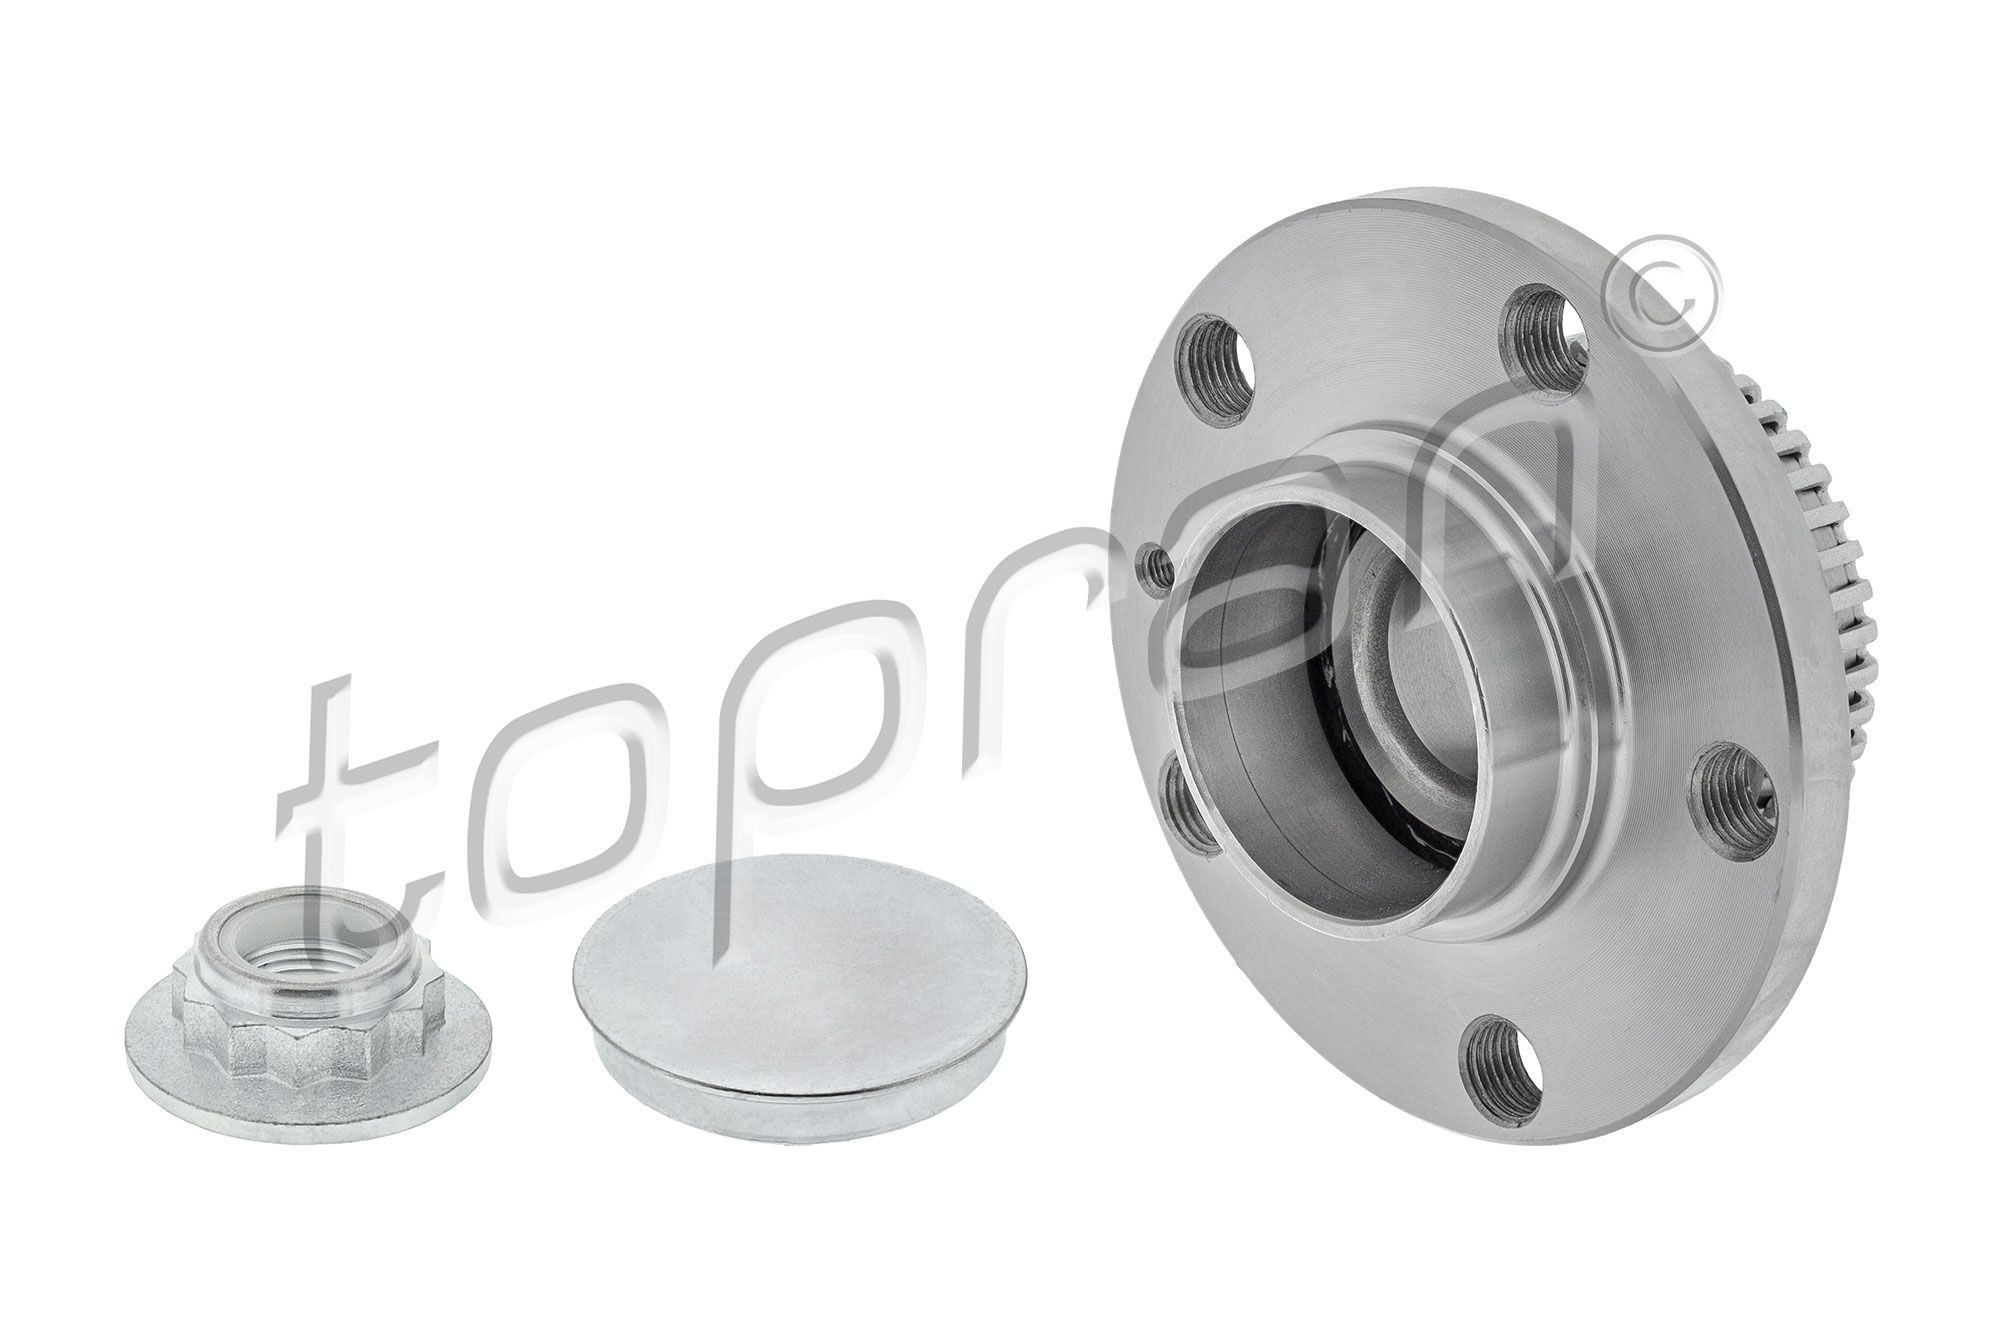 111 314 TOPRAN Wheel bearings AUDI Rear Axle Left, Rear Axle Right, with ABS sensor ring, Wheel Bearing integrated into wheel hub, with grease cap, with nut